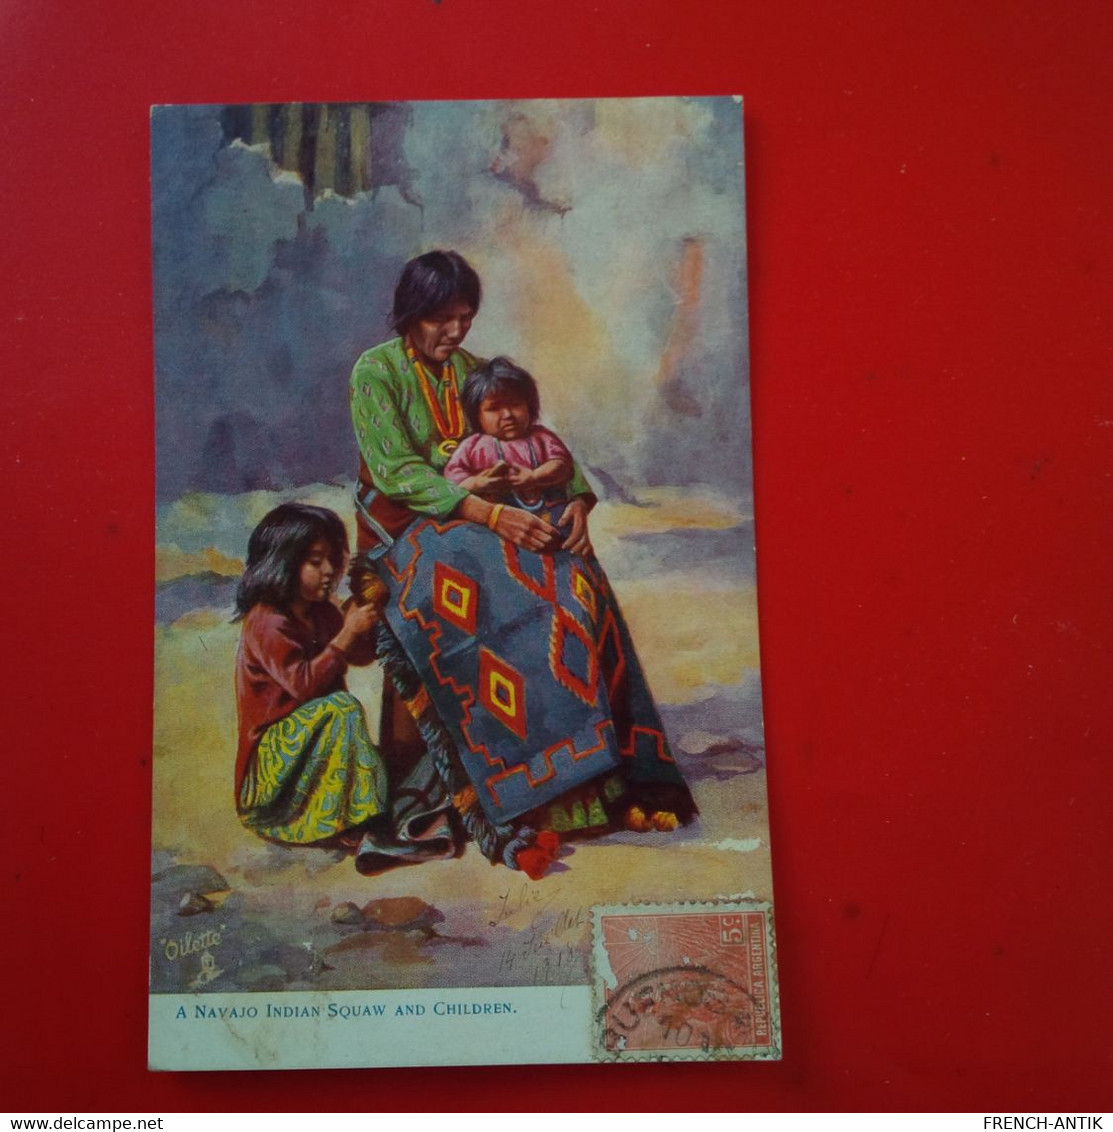 A NAVAJO INDIAN SQUAW AND CHILDREN - Indianer